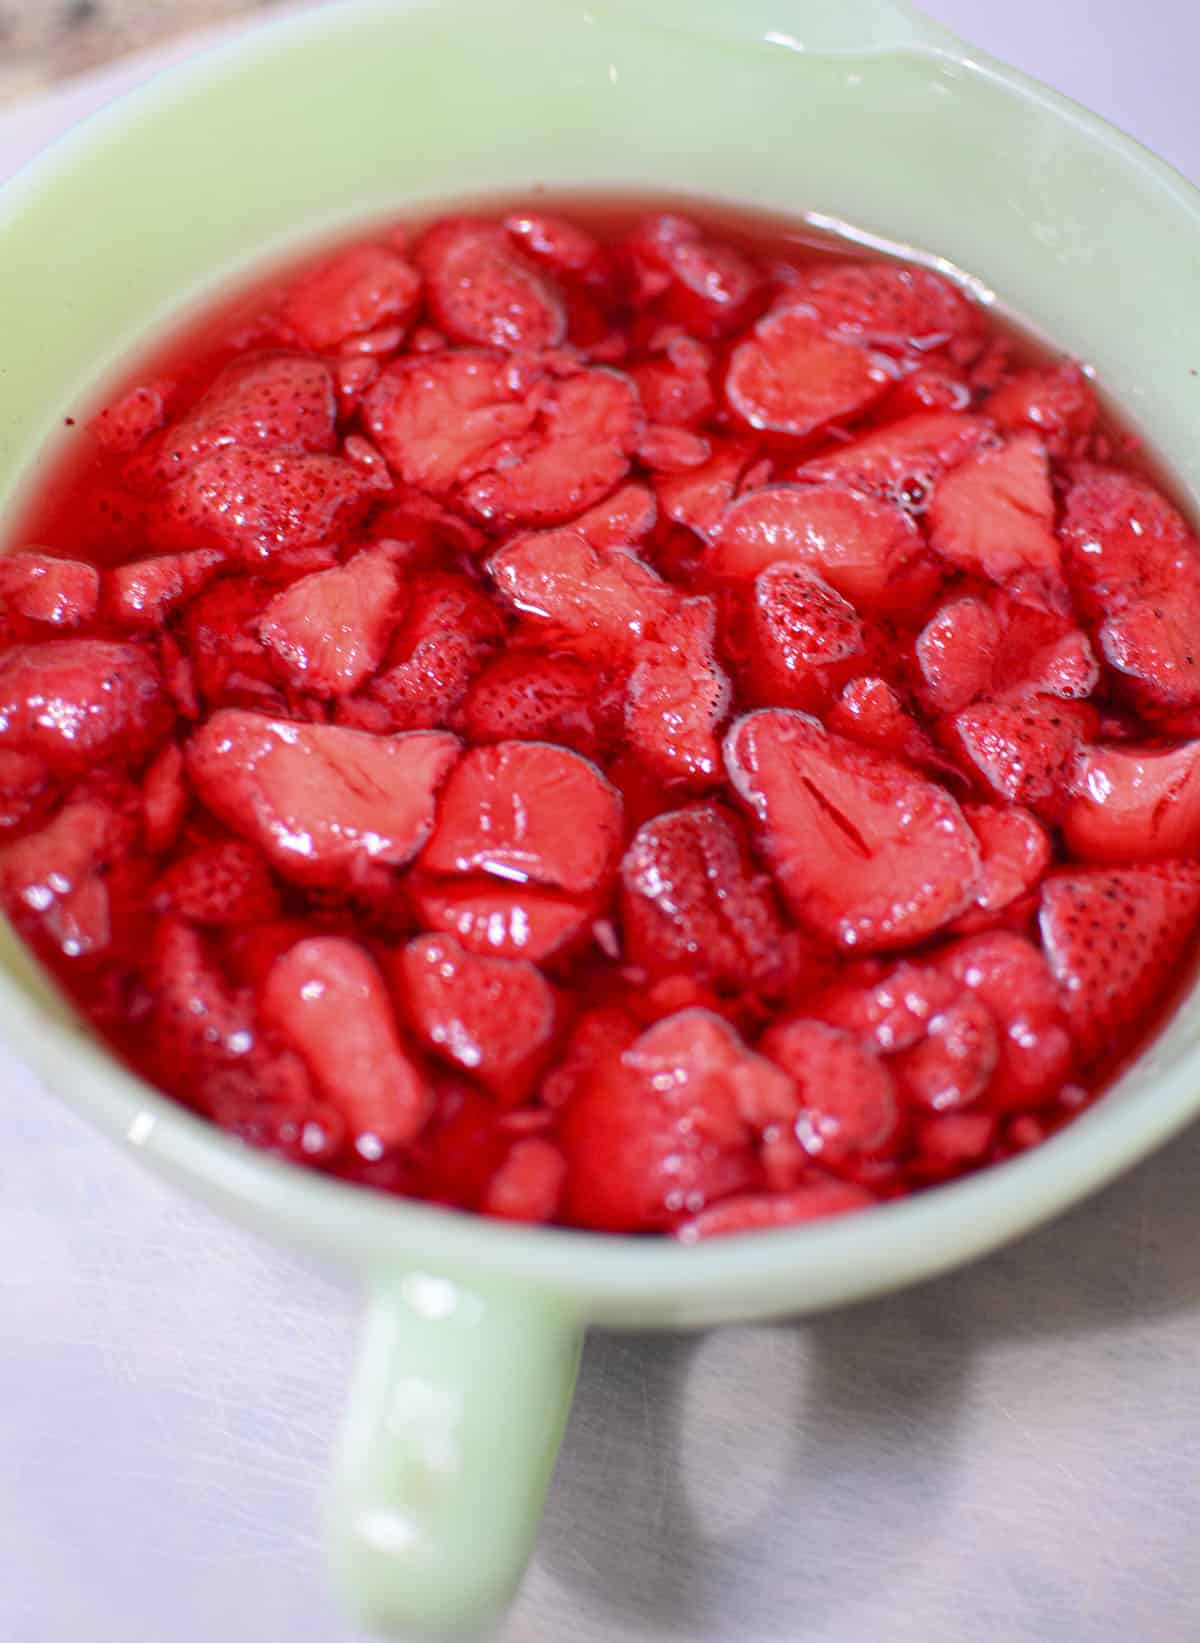 Strawberries added to jello in a green bowl.